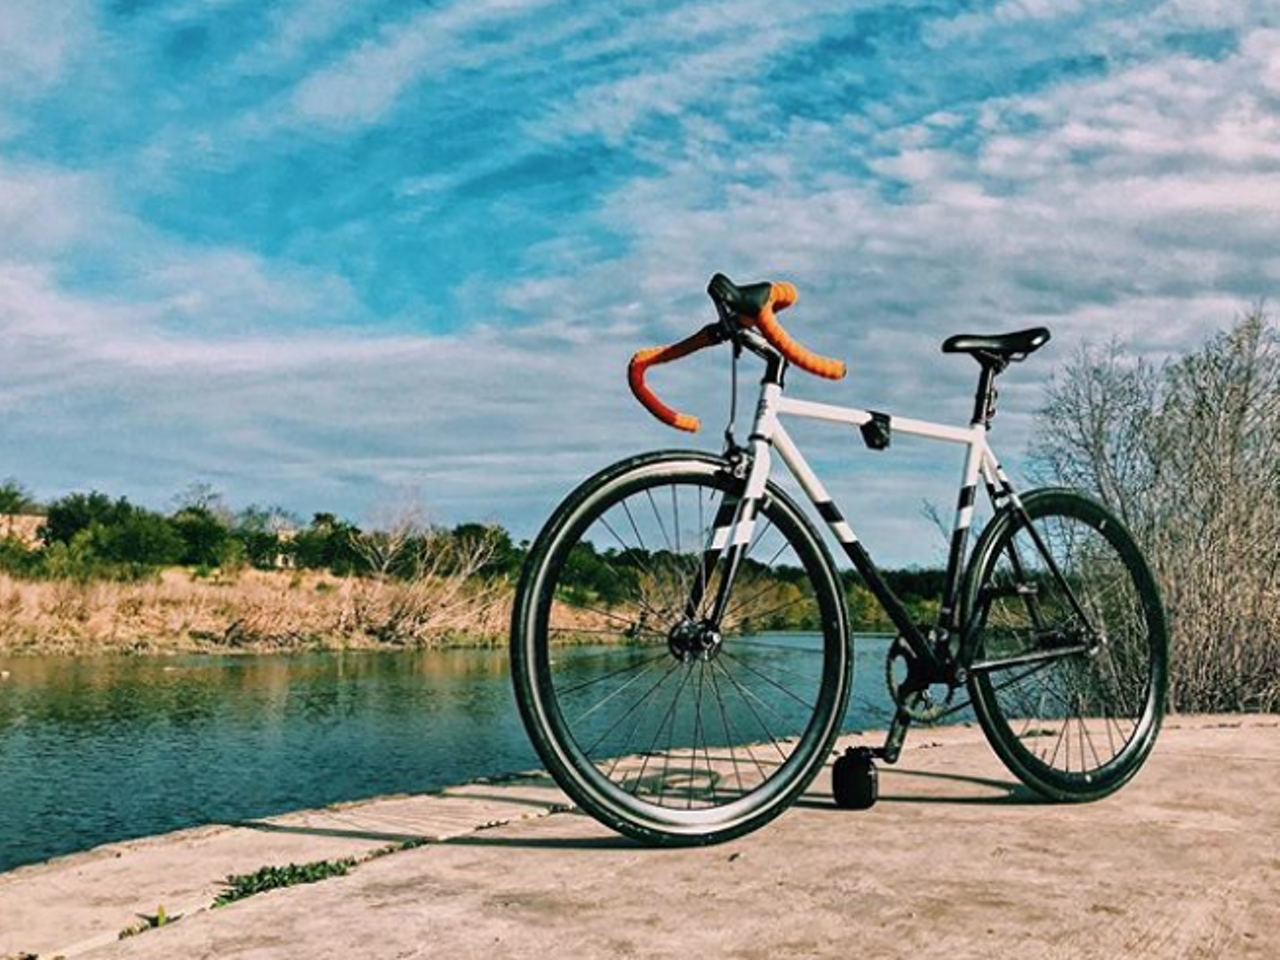 Get out and get active 
Why not work out some of that cabin fever with an outdoor workout? You can run, bike or walk on San Antonio's parks myriad trails and greenways to get your heart pumping in the great outdoors.
Photo via Instagram / ryanibarra24